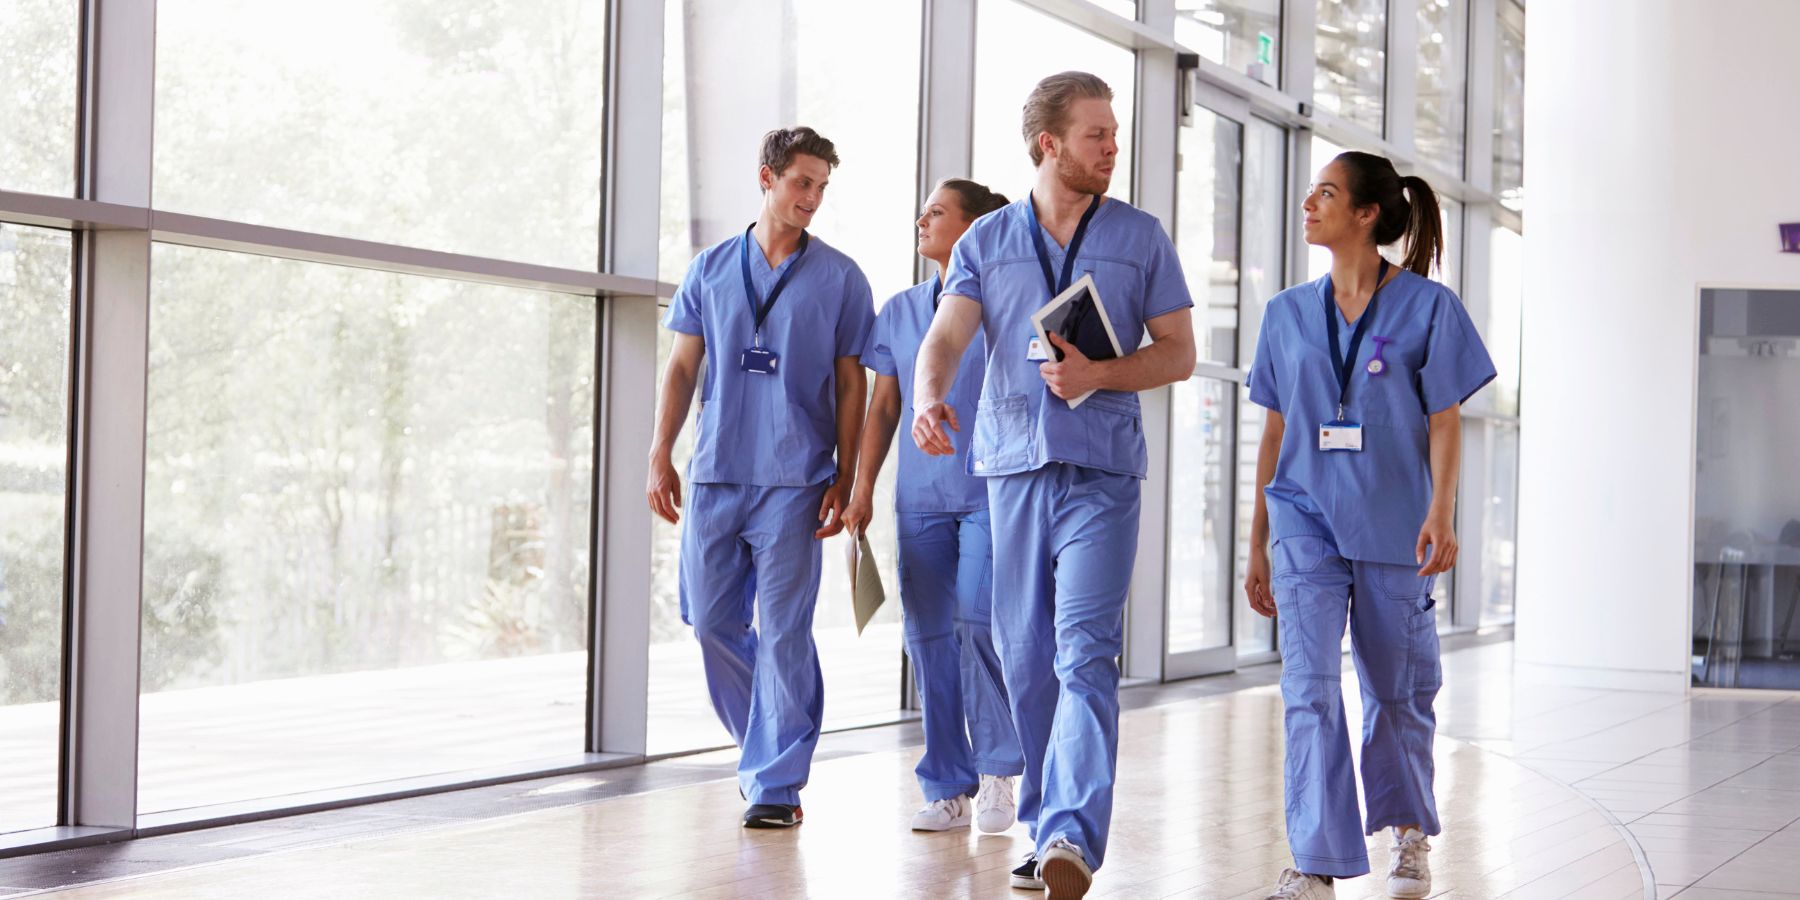 The image features a group of four healthcare professionals walking through a hospital corridor. They are dressed in blue scrubs, with ID badges visible, signifying their roles in the healthcare industry. The group appears to be in a discussion, possibly about patient care or hospital matters, as they walk past large windows that flood the space with natural light. The setting is indicative of a modern healthcare facility, emphasizing the collaborative nature of medical staff working together.